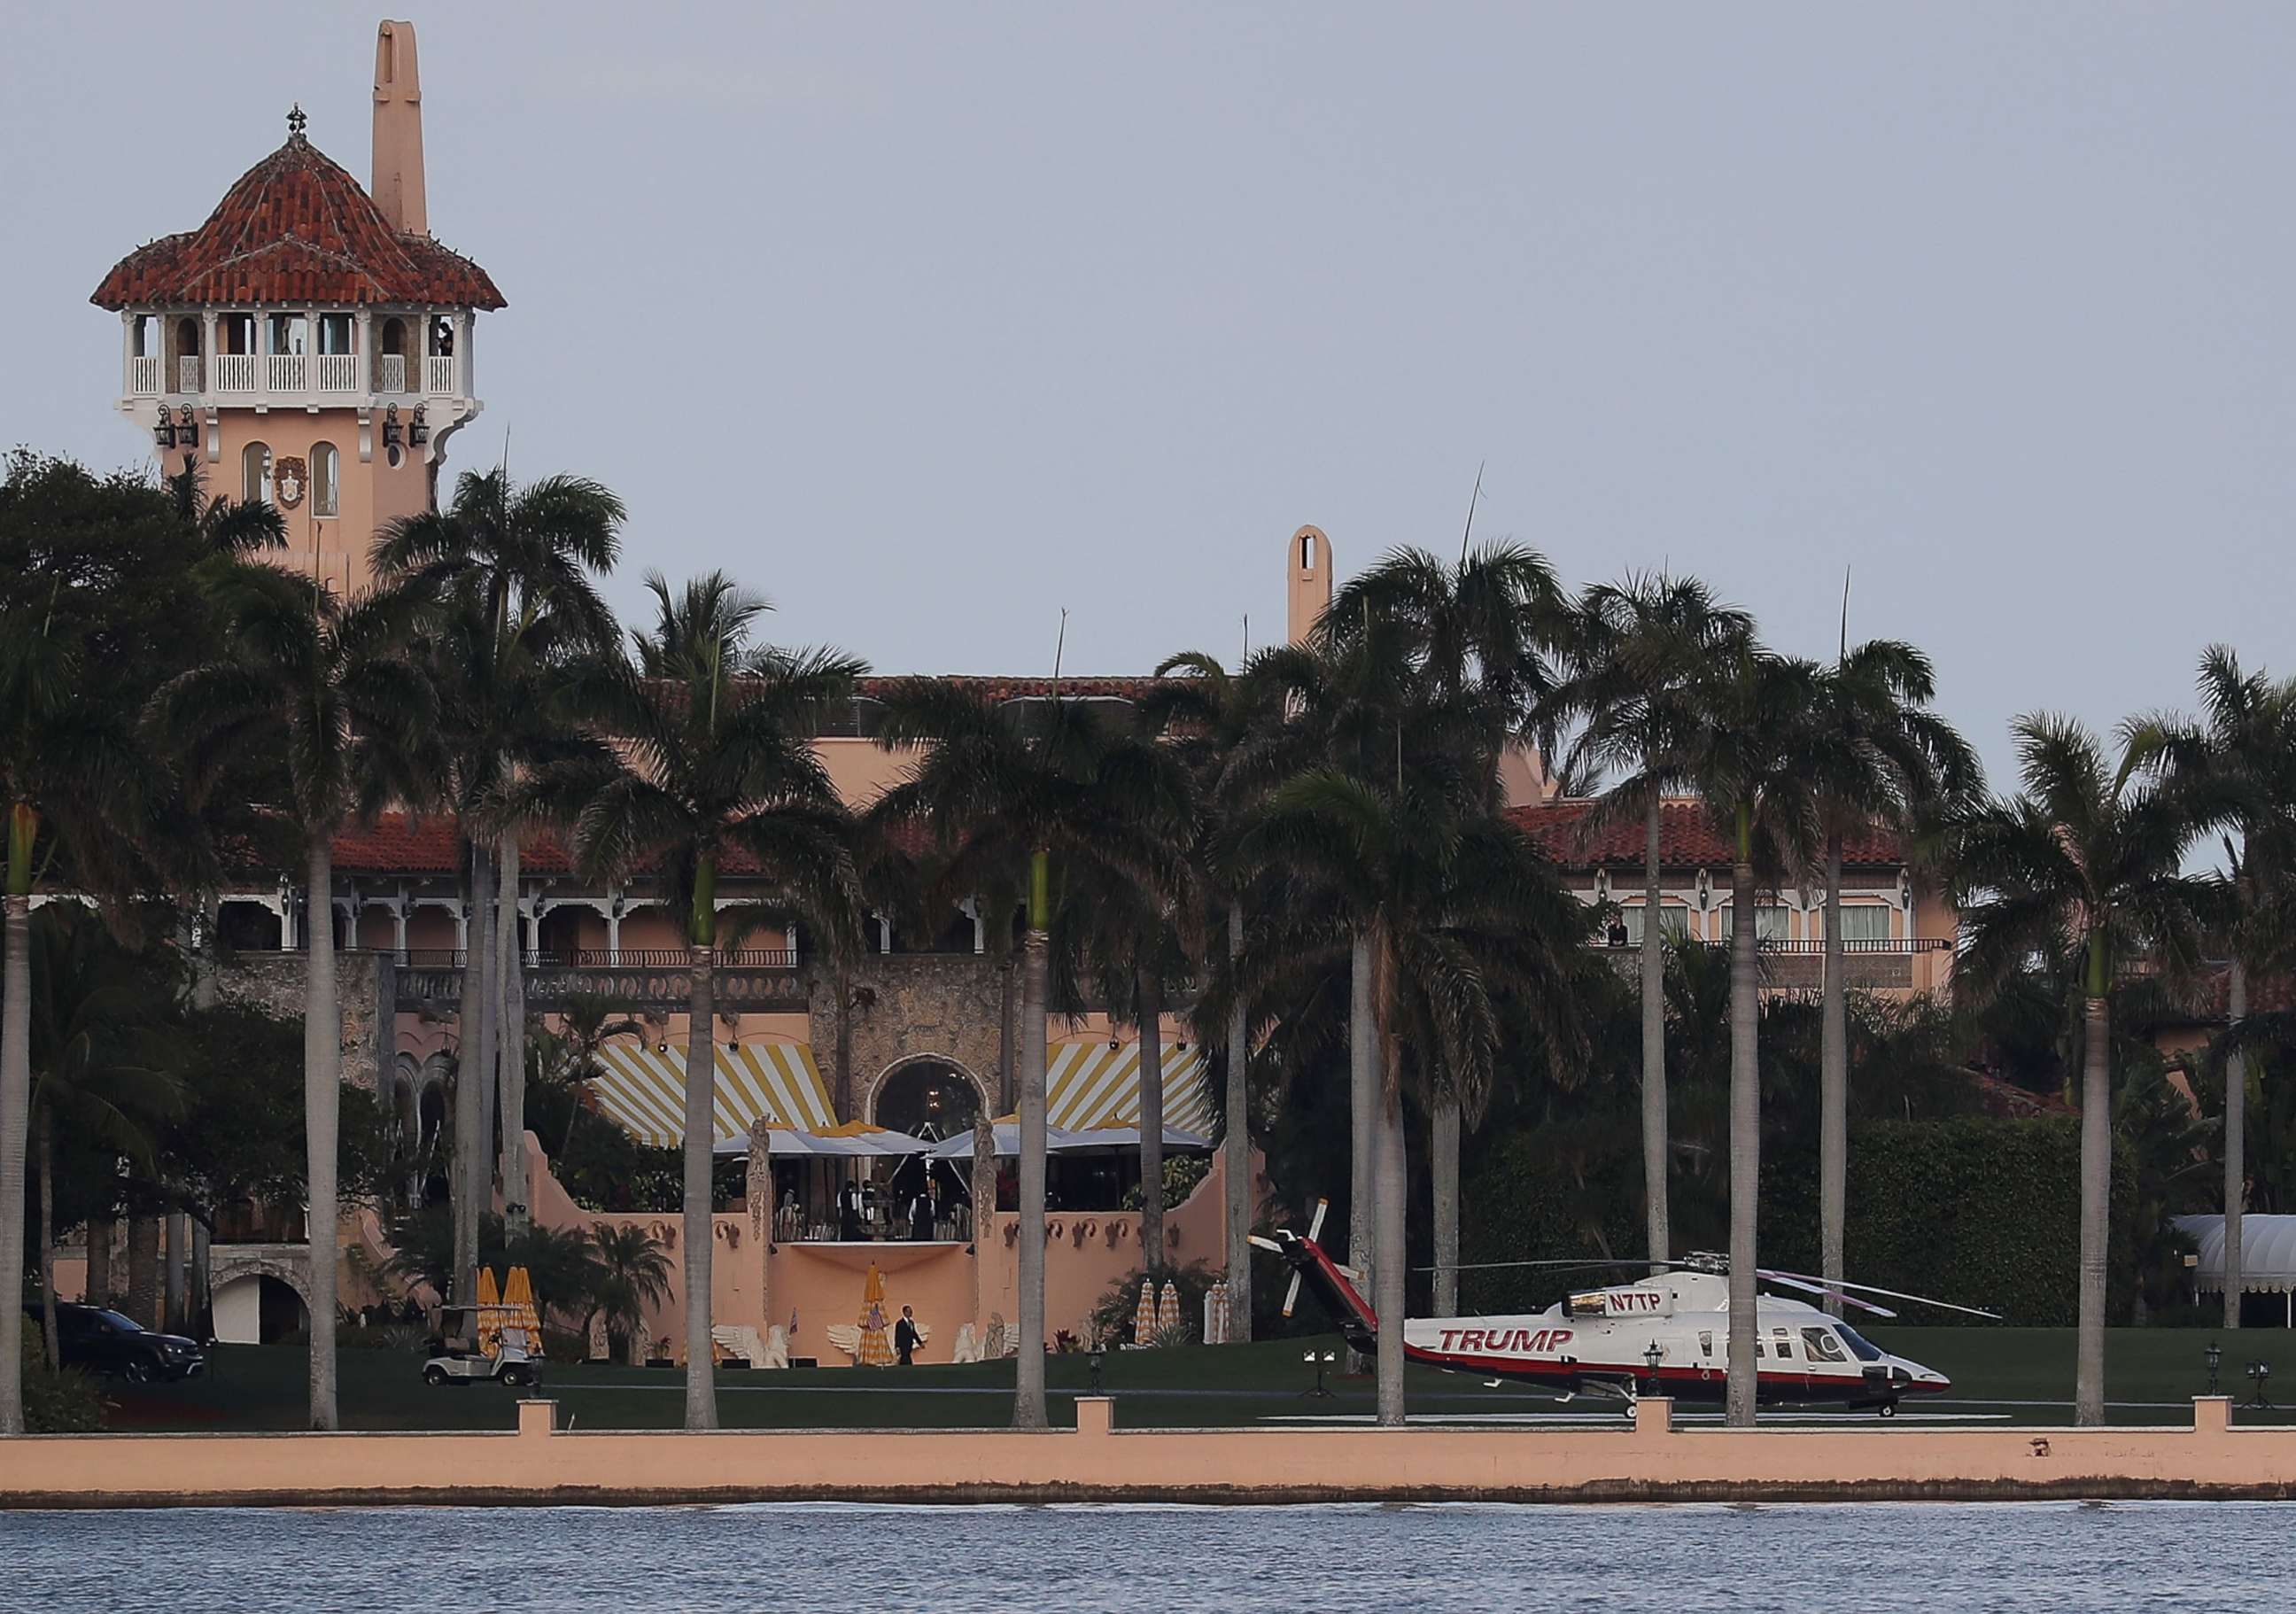 PHOTO: The Trump helicopter is seen at the Mar-a-Lago Resort, April 8, 2017, in Palm Beach, Fla.